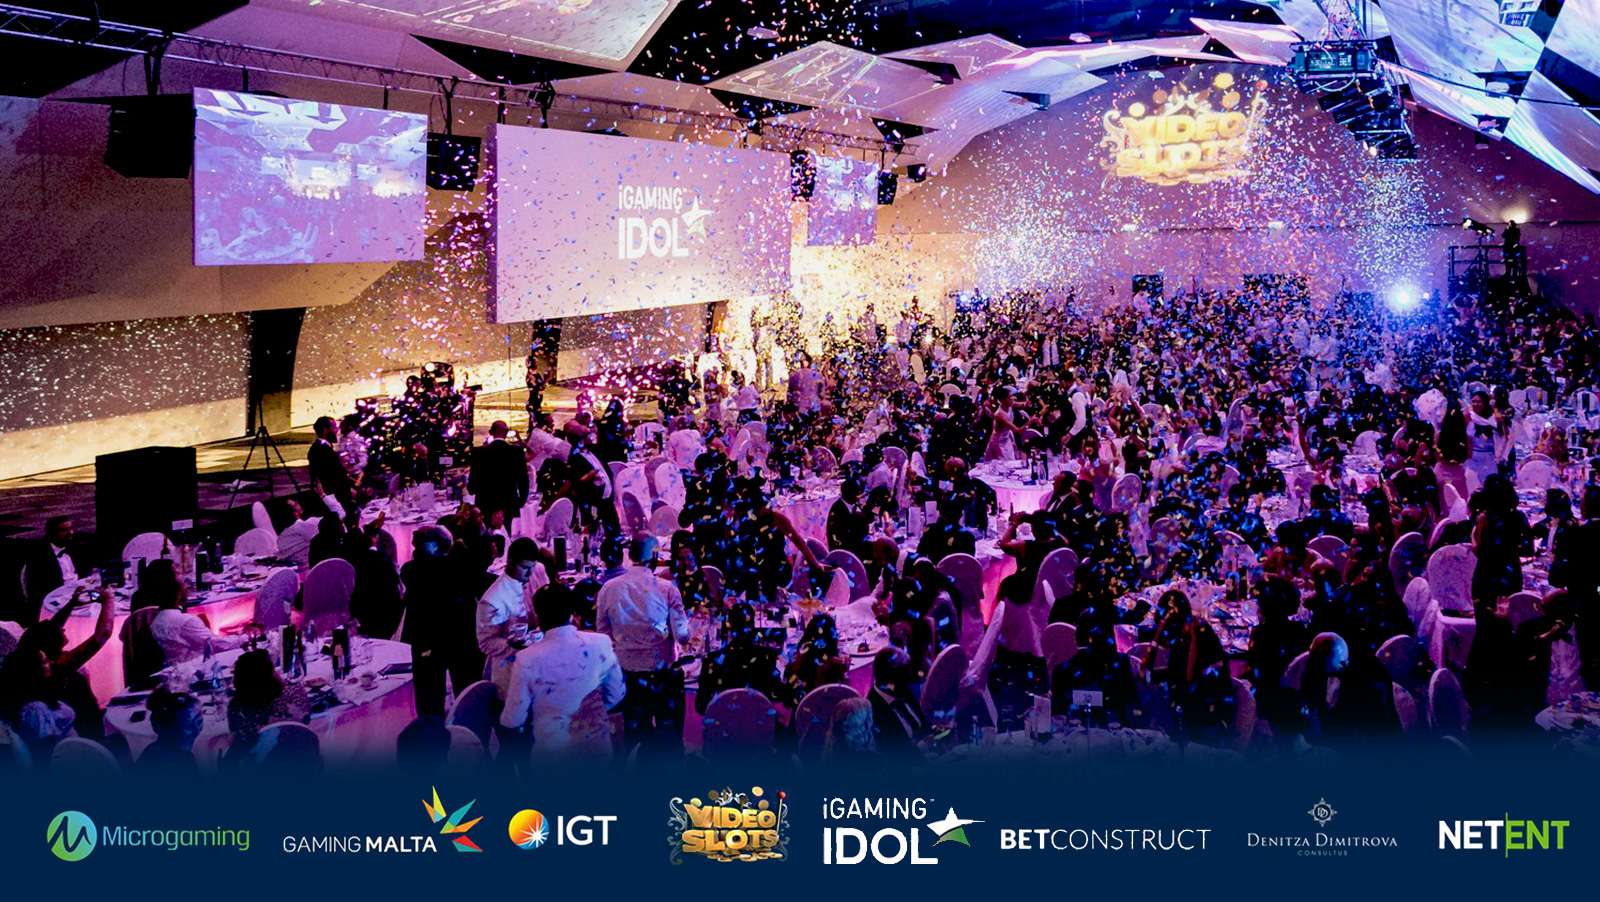 Becky’s Affiliated: Why iGaming Idol is so special to me and the iGaming industry